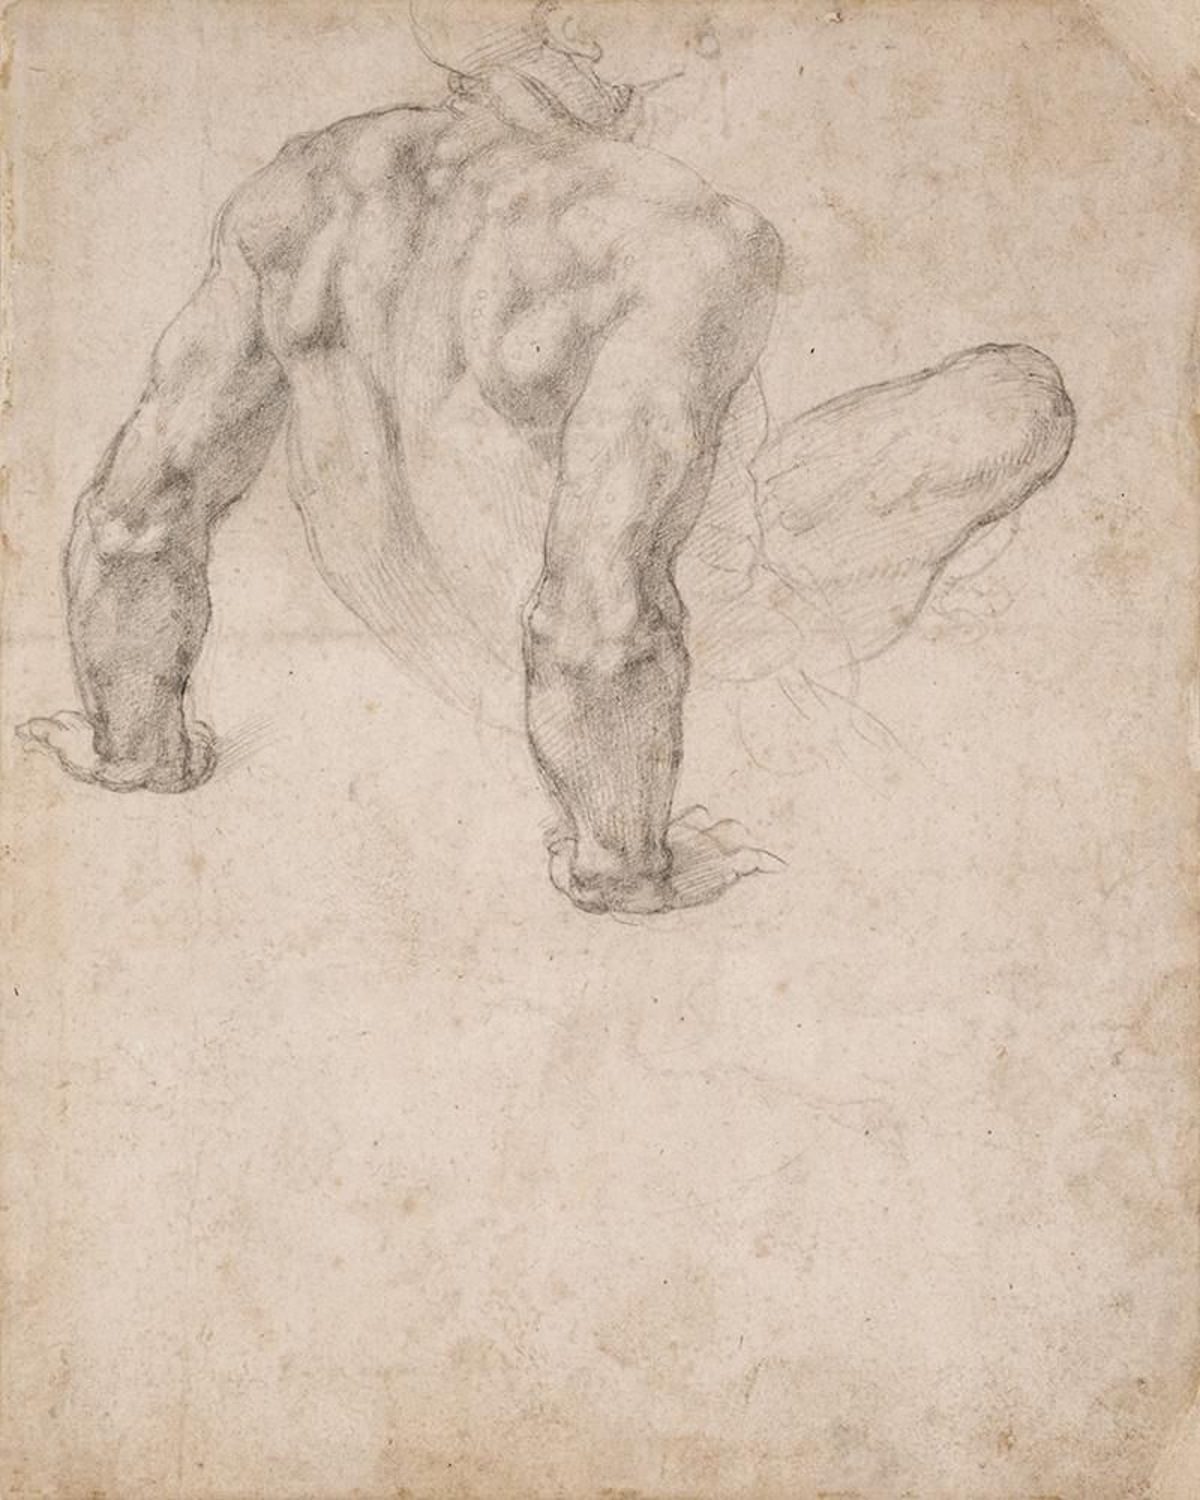 Michelangelo sketch (© The Trustees of the British Museum)